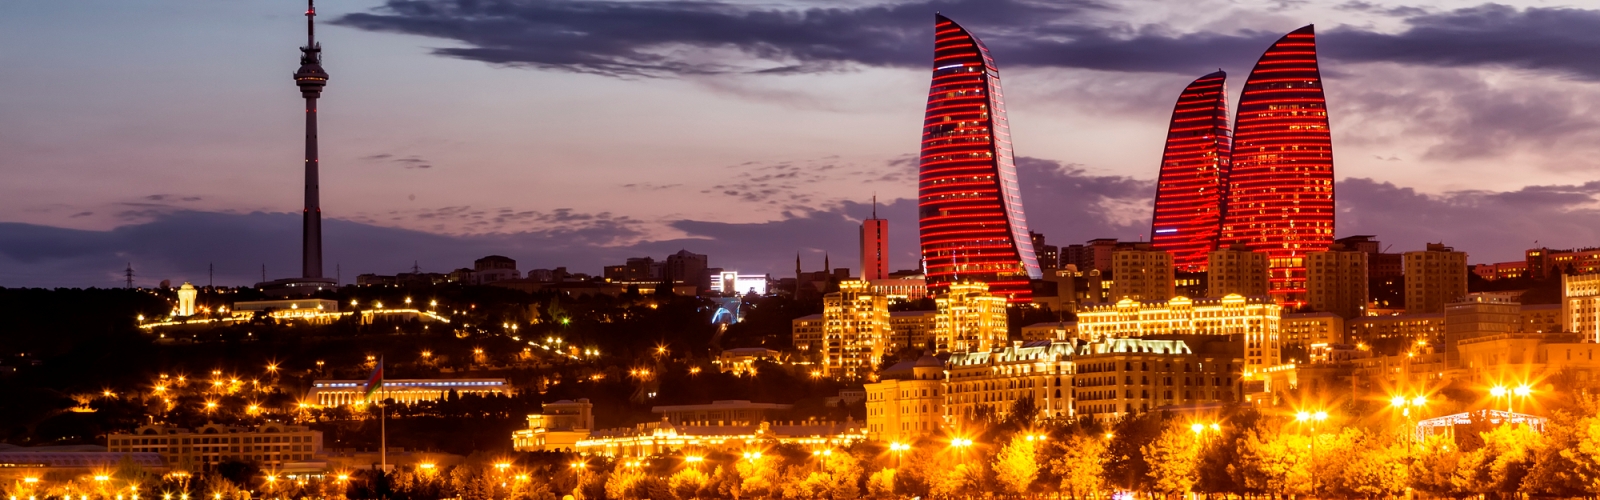 View of the waterfront and the city at night, in Baku, Azerbaijan.